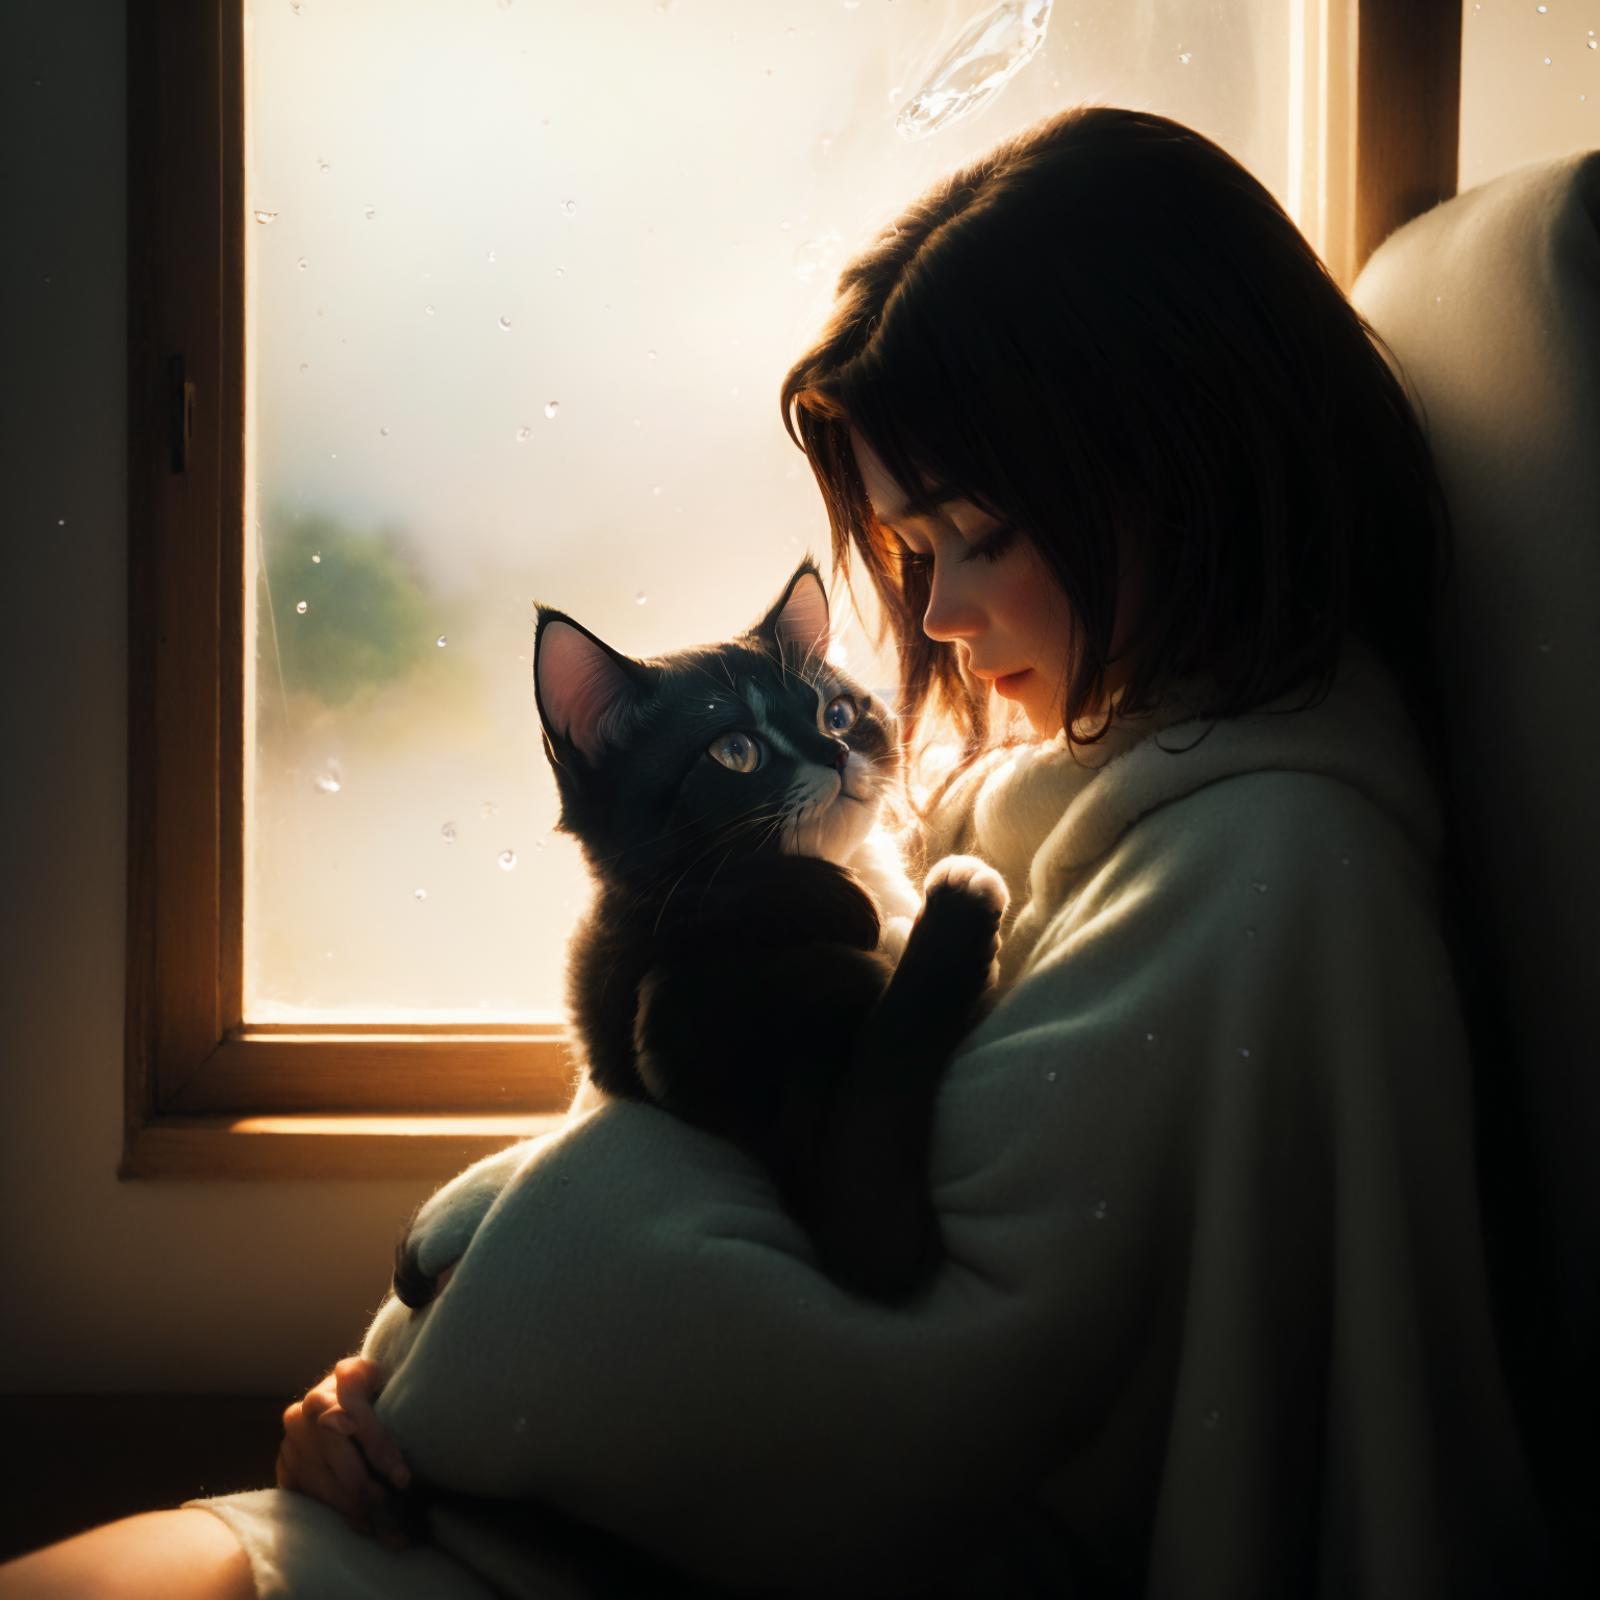 A young woman holding a black cat in her arms and looking out the window.